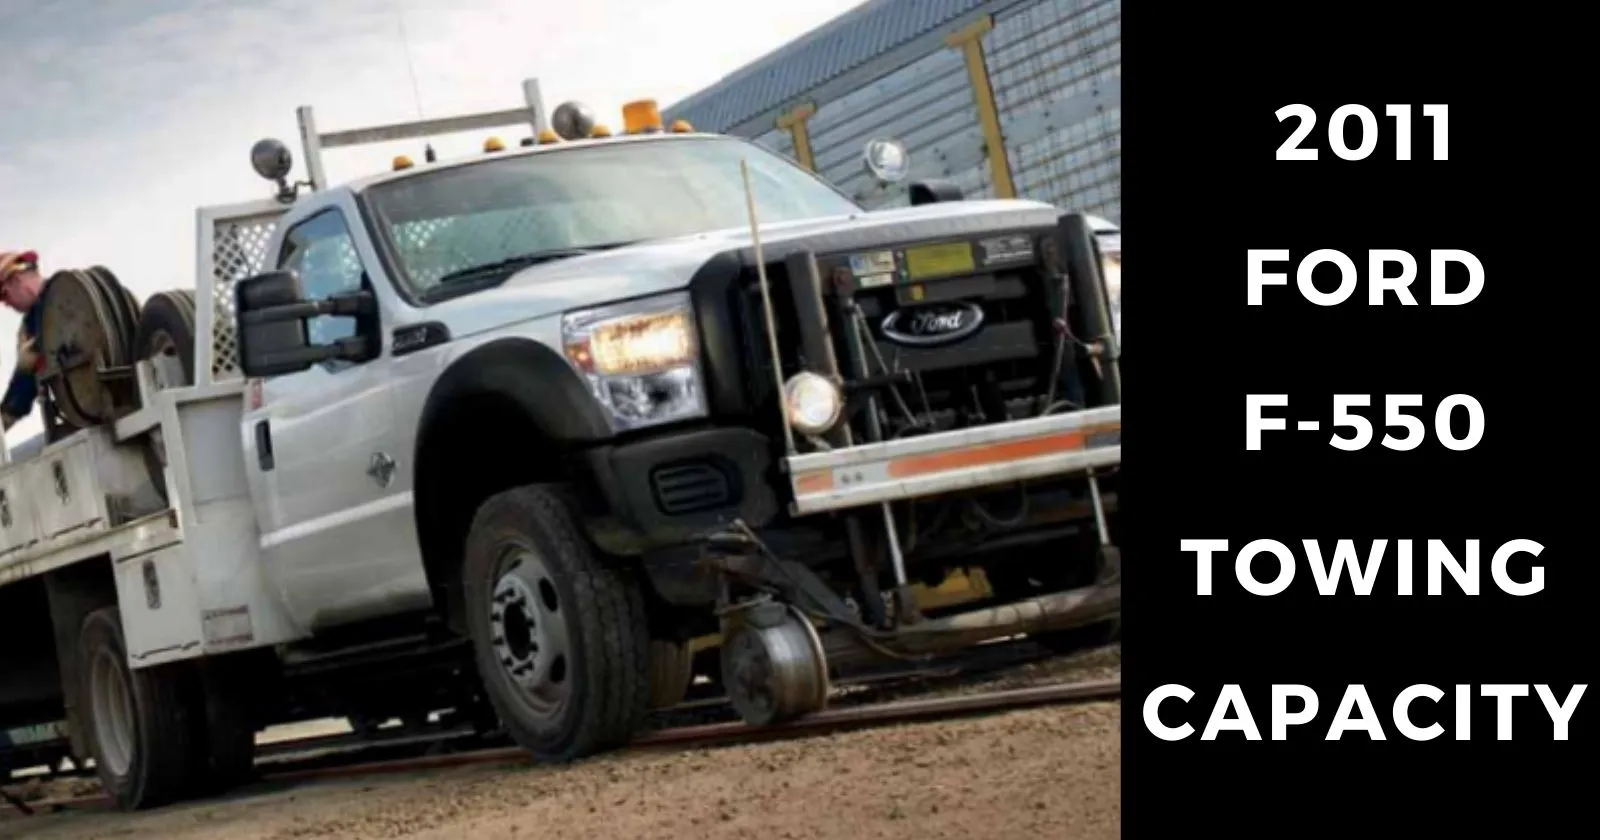 2011-ford-f550-towing-capacity-with-chart-thecartowing